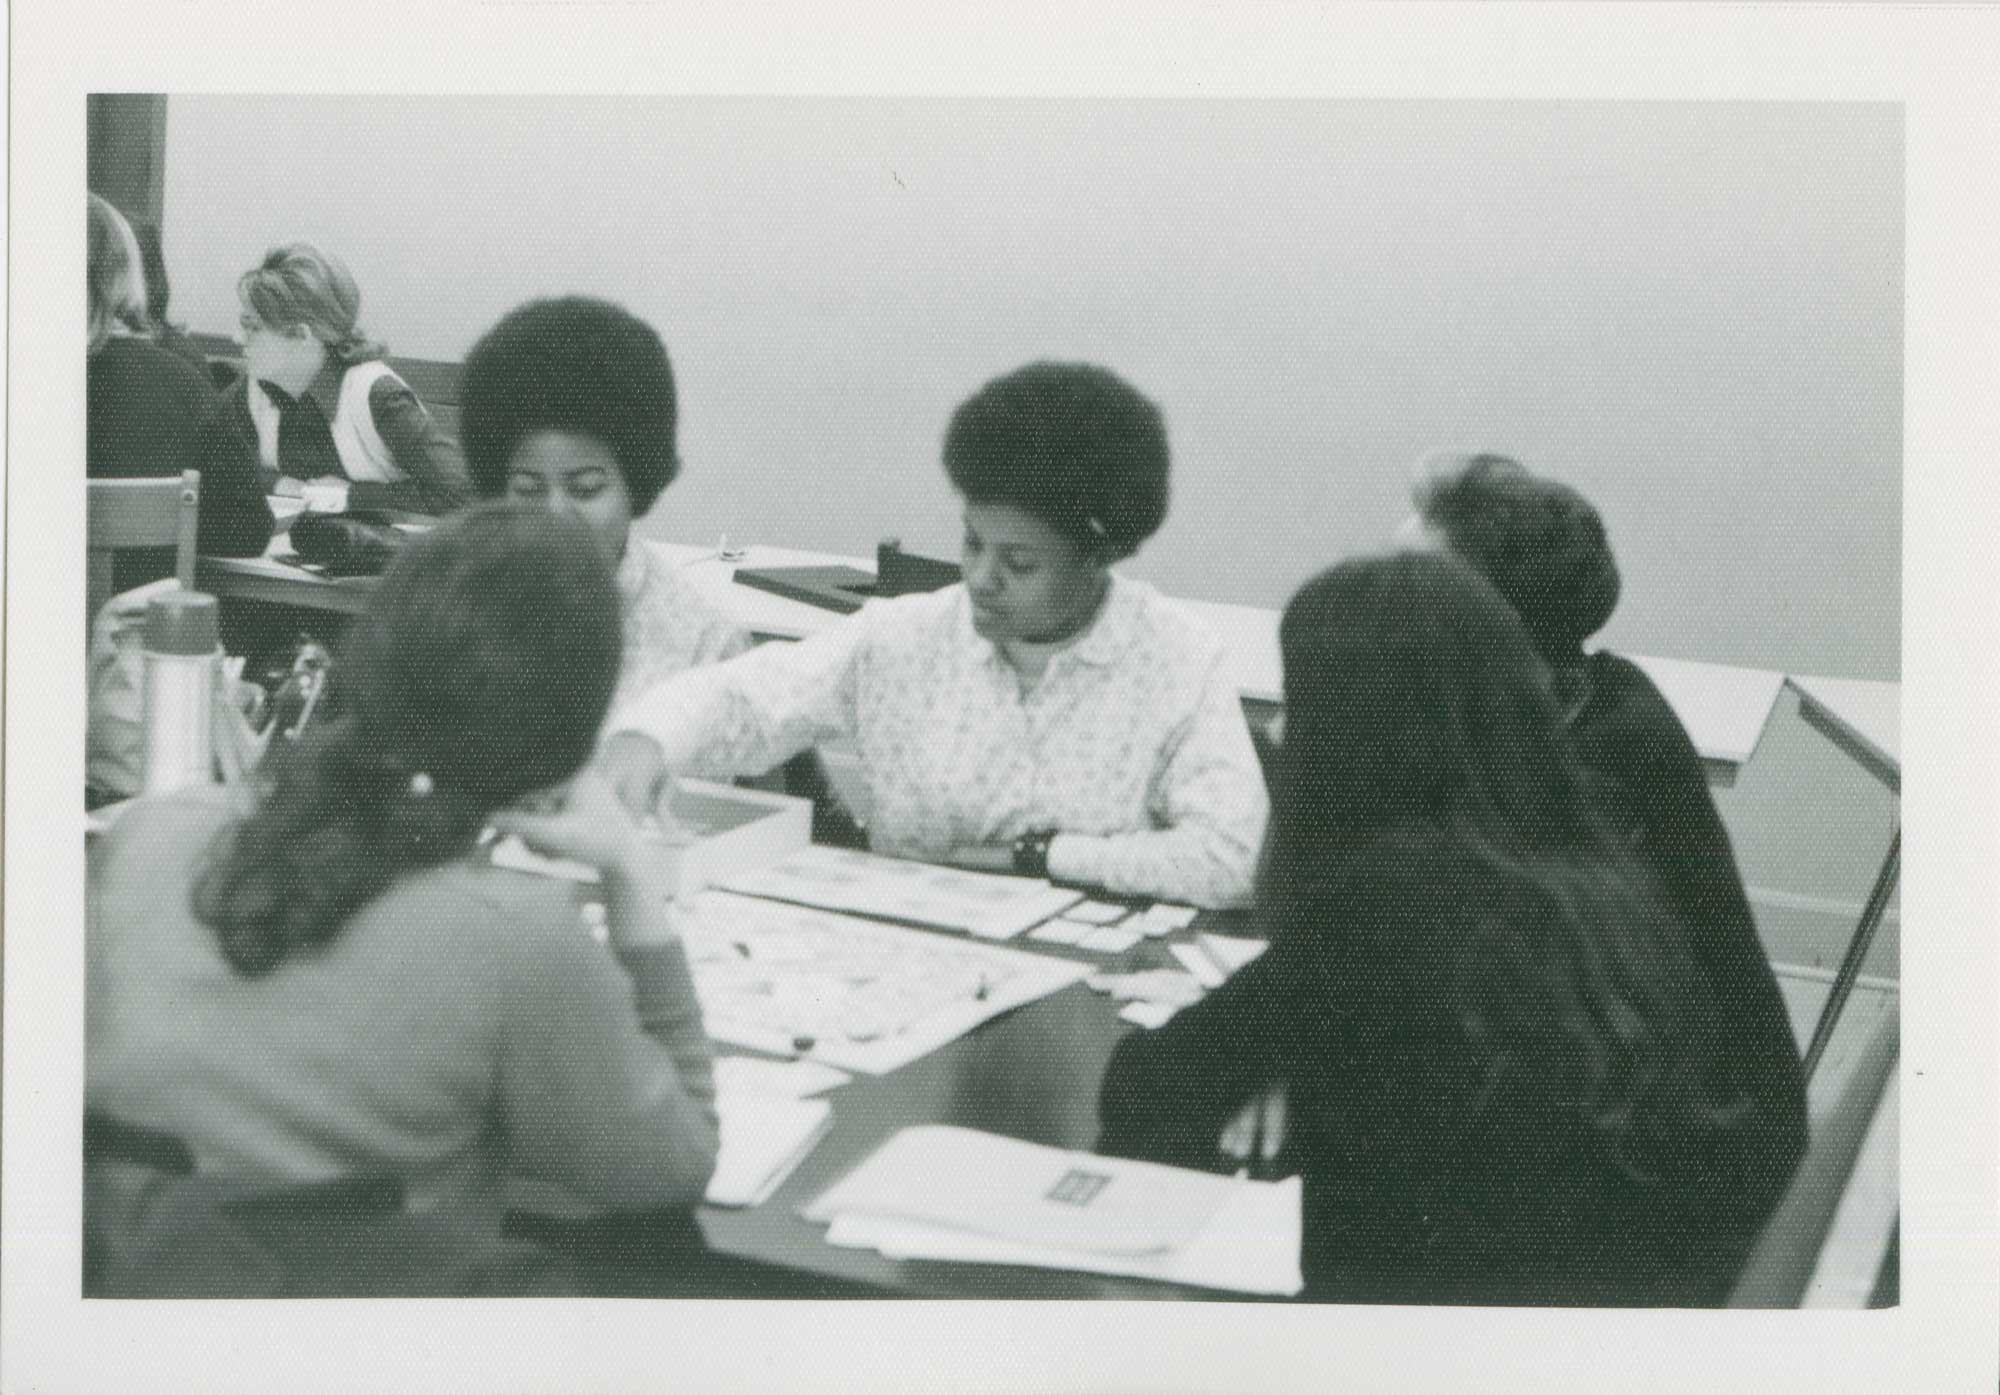 Archival photo of students, black and white, sitting at table and playing the board game. 